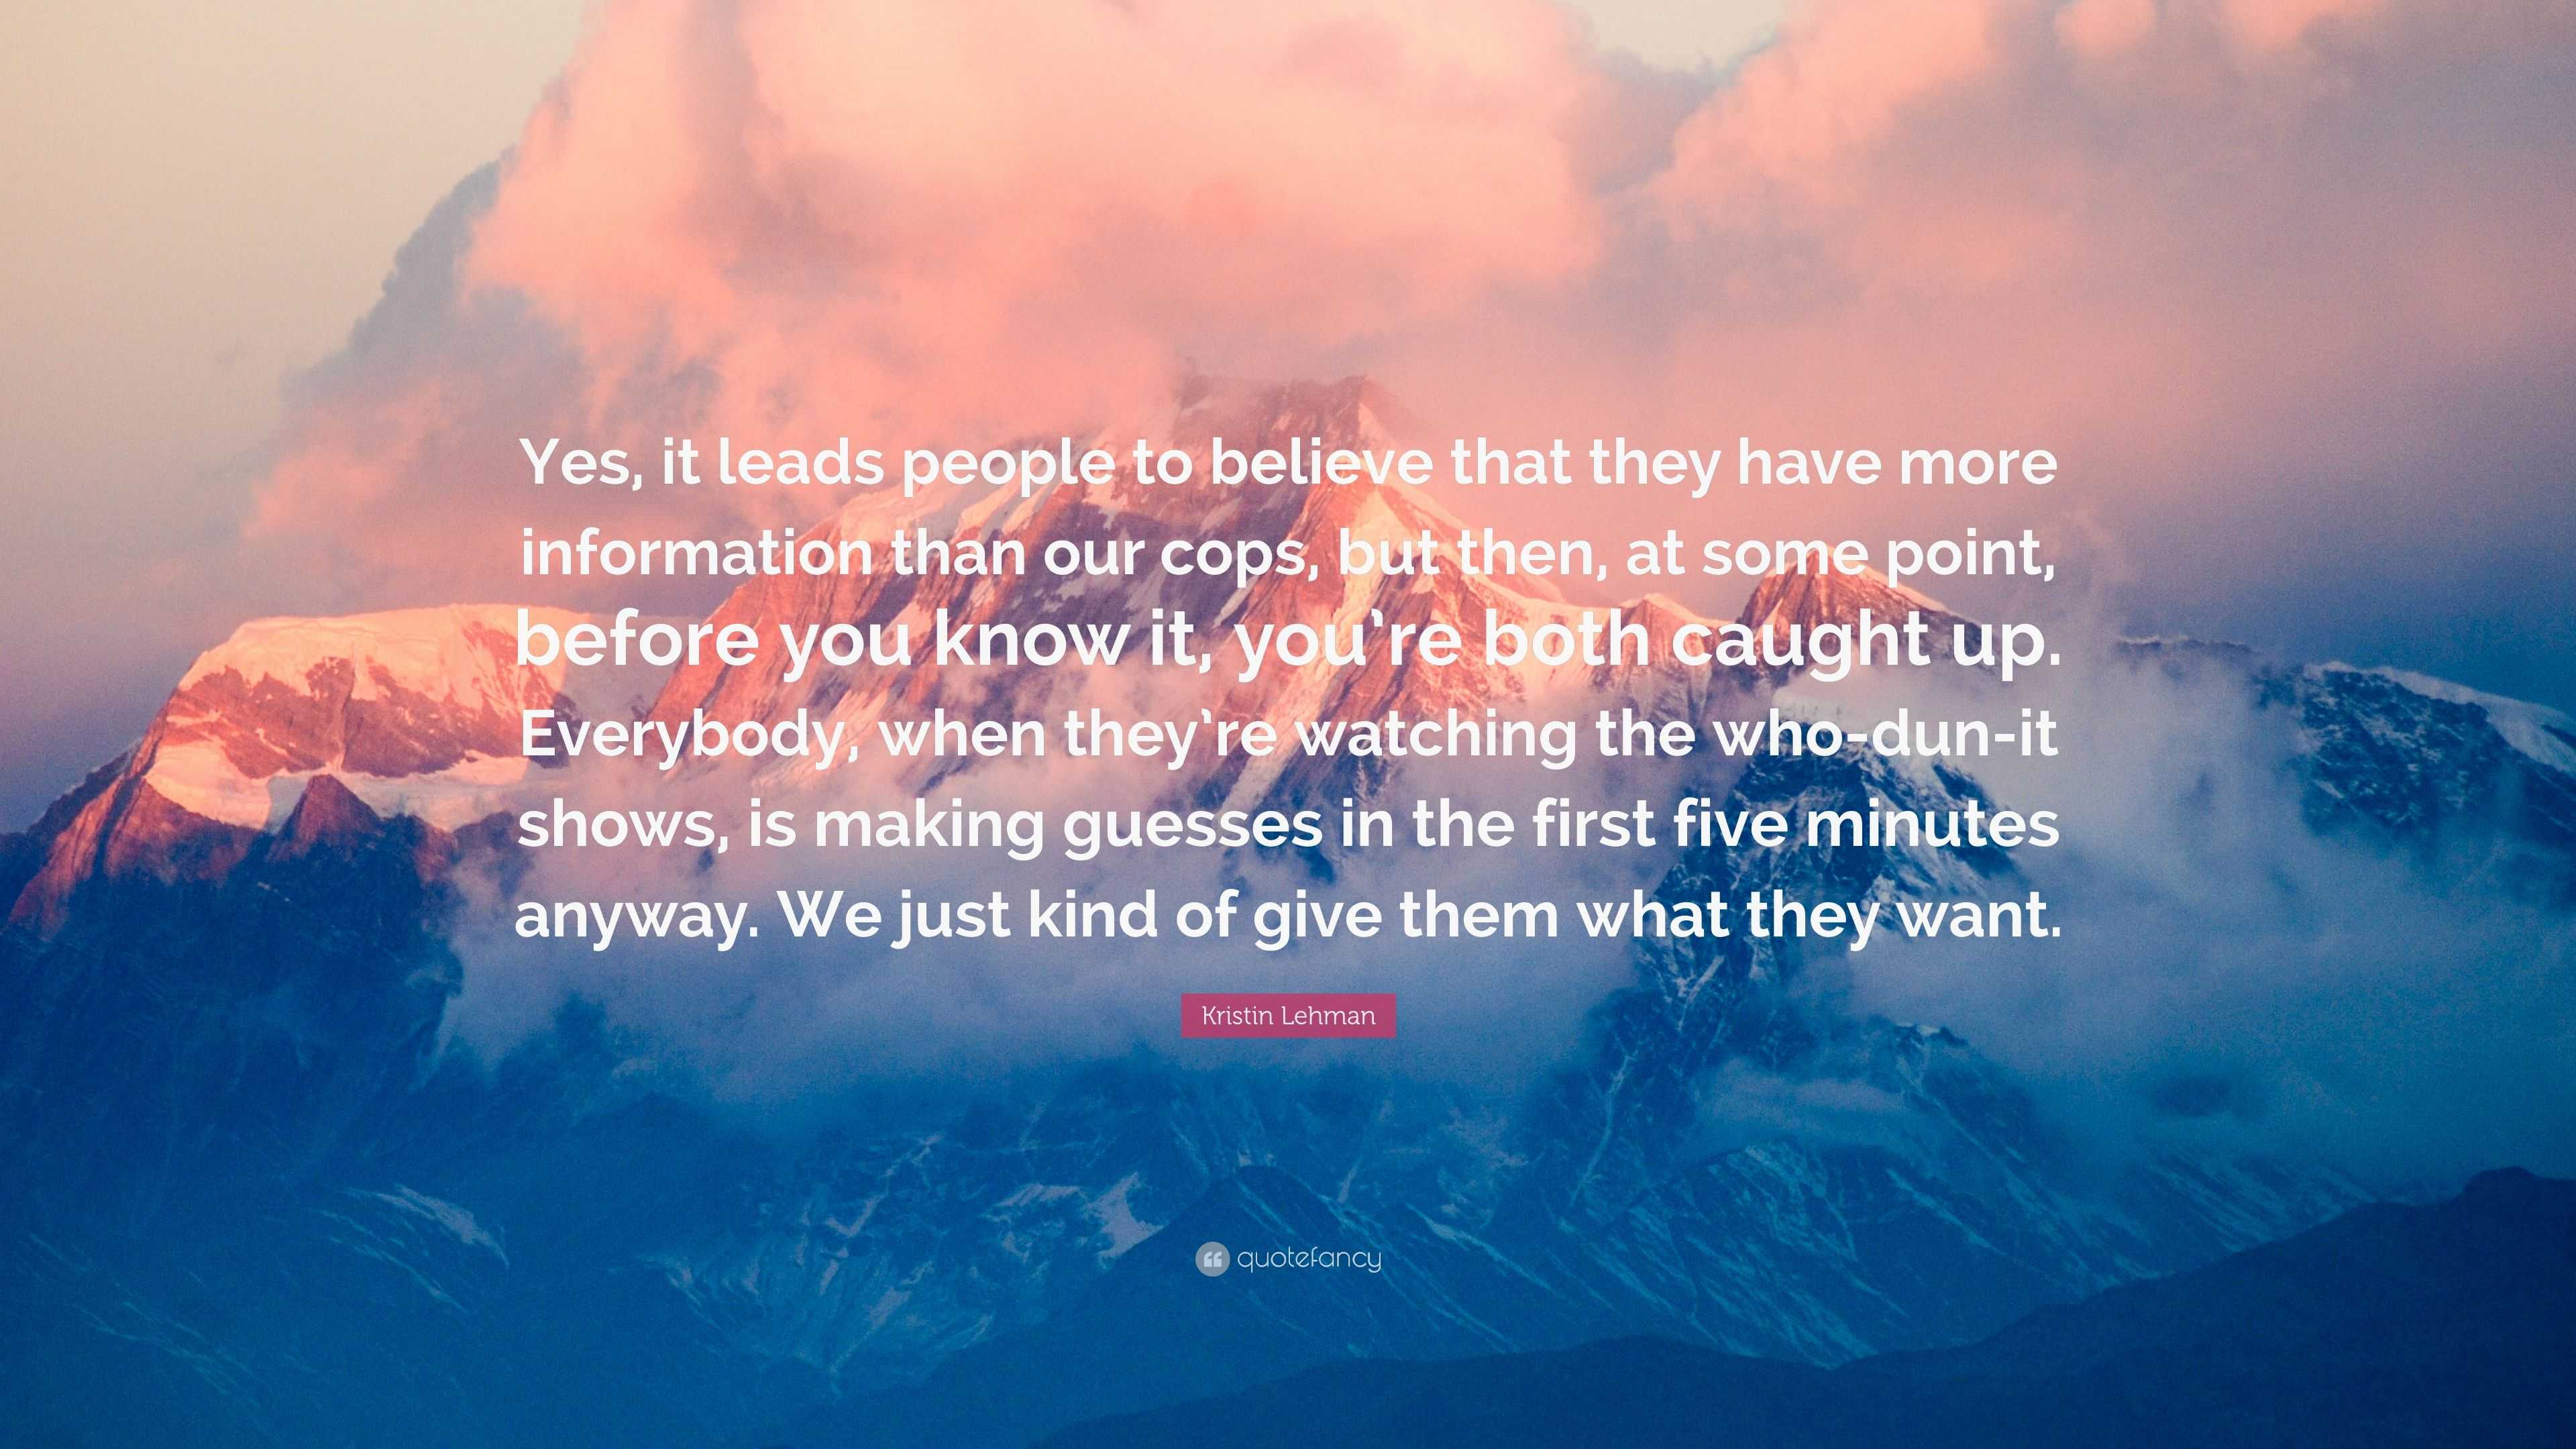 Kristin Lehman Quote: “Yes, it leads people to believe that they have ...